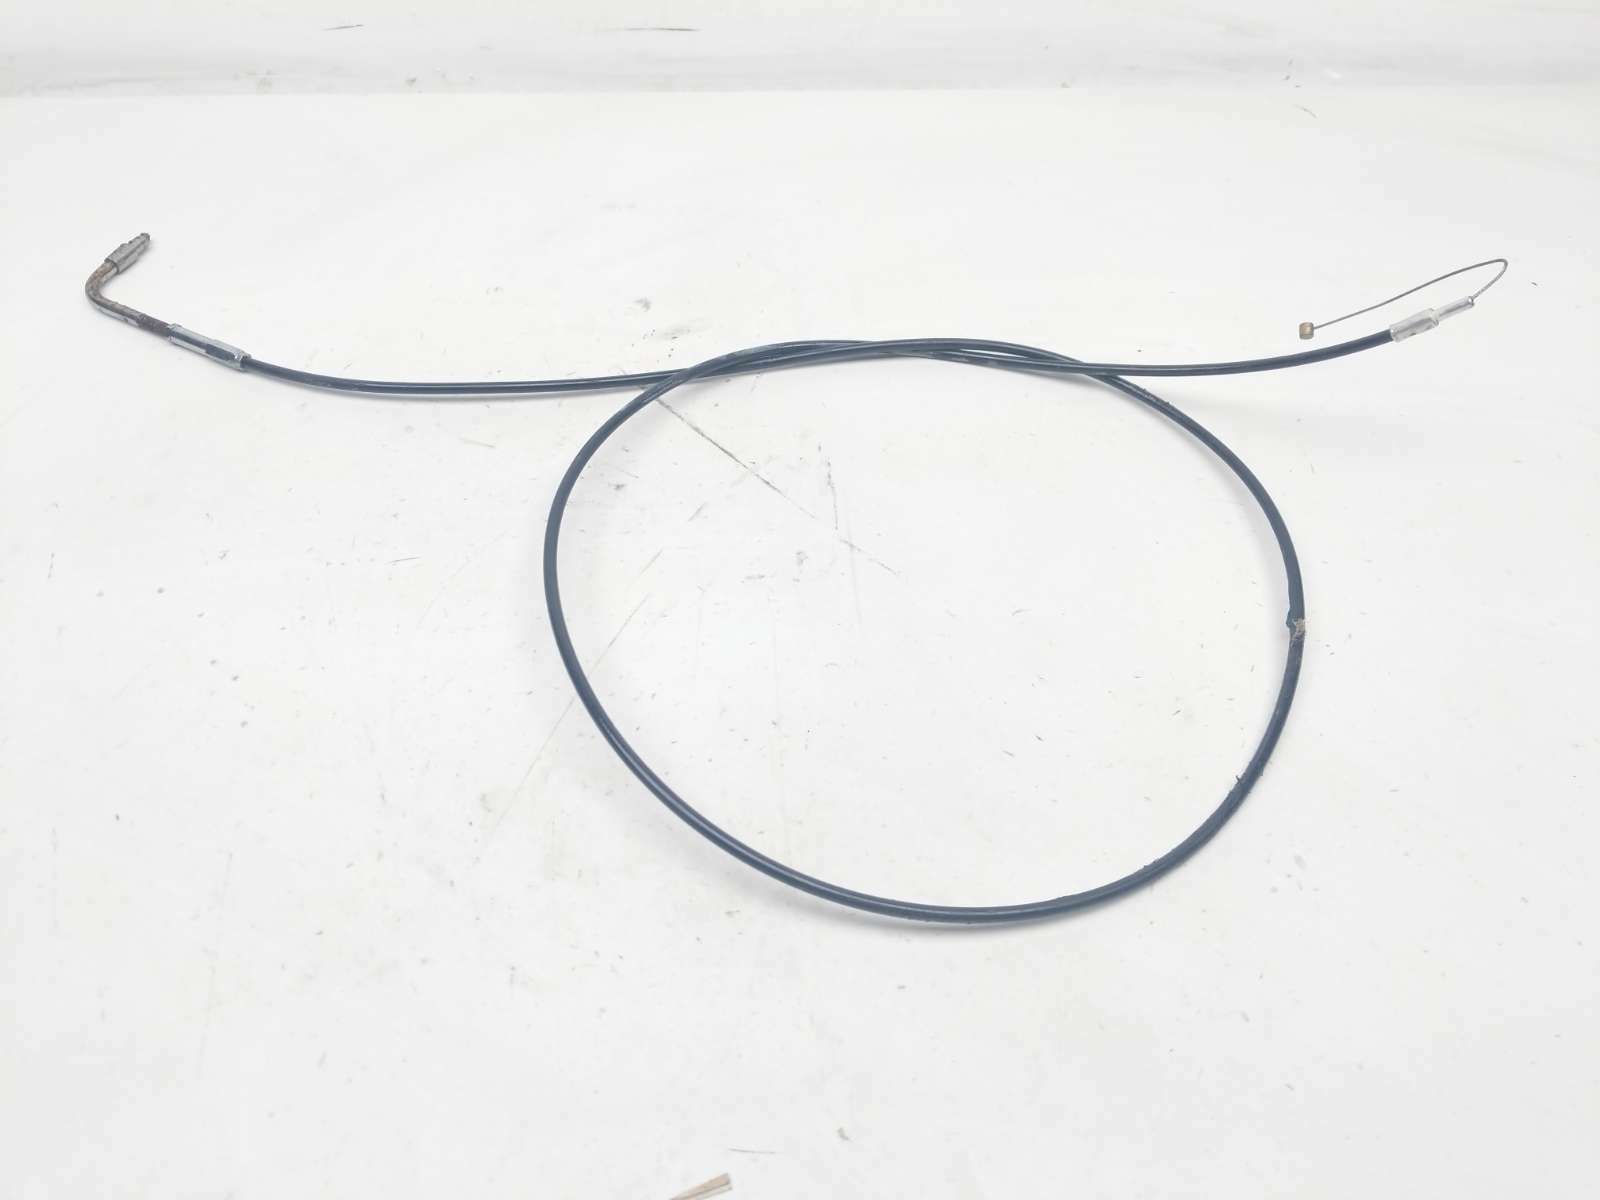 07 Harley Ultra Classic Electra Glide FLHTCUI Throttle Cable Line (A)